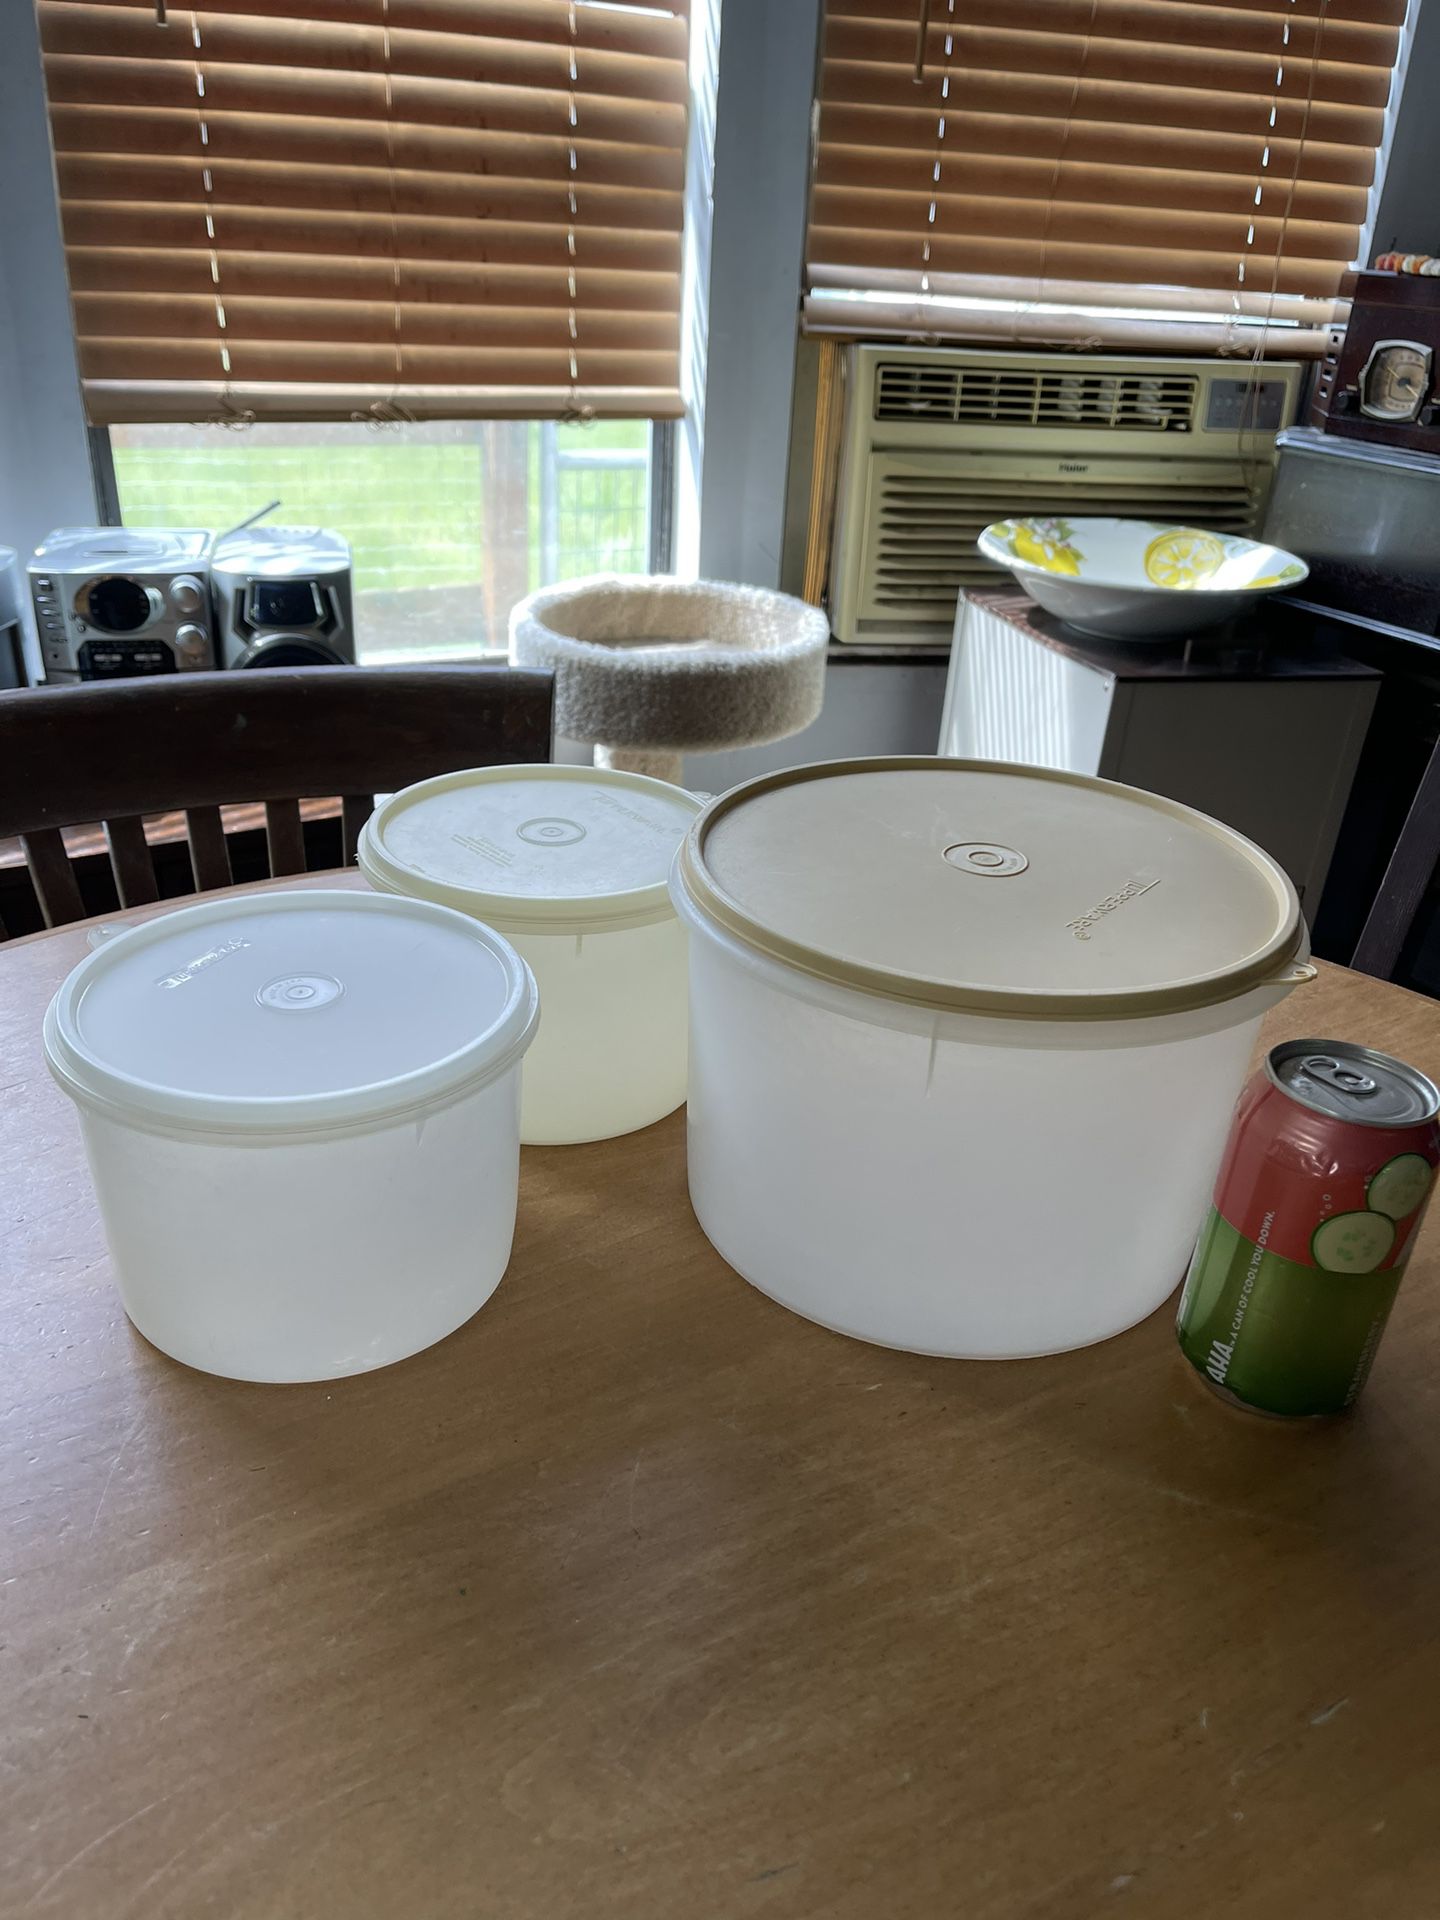 Tupperware tub style containers. 9”x6” $6. 6” x 4 1/2” $4 and $2. Rochester wa